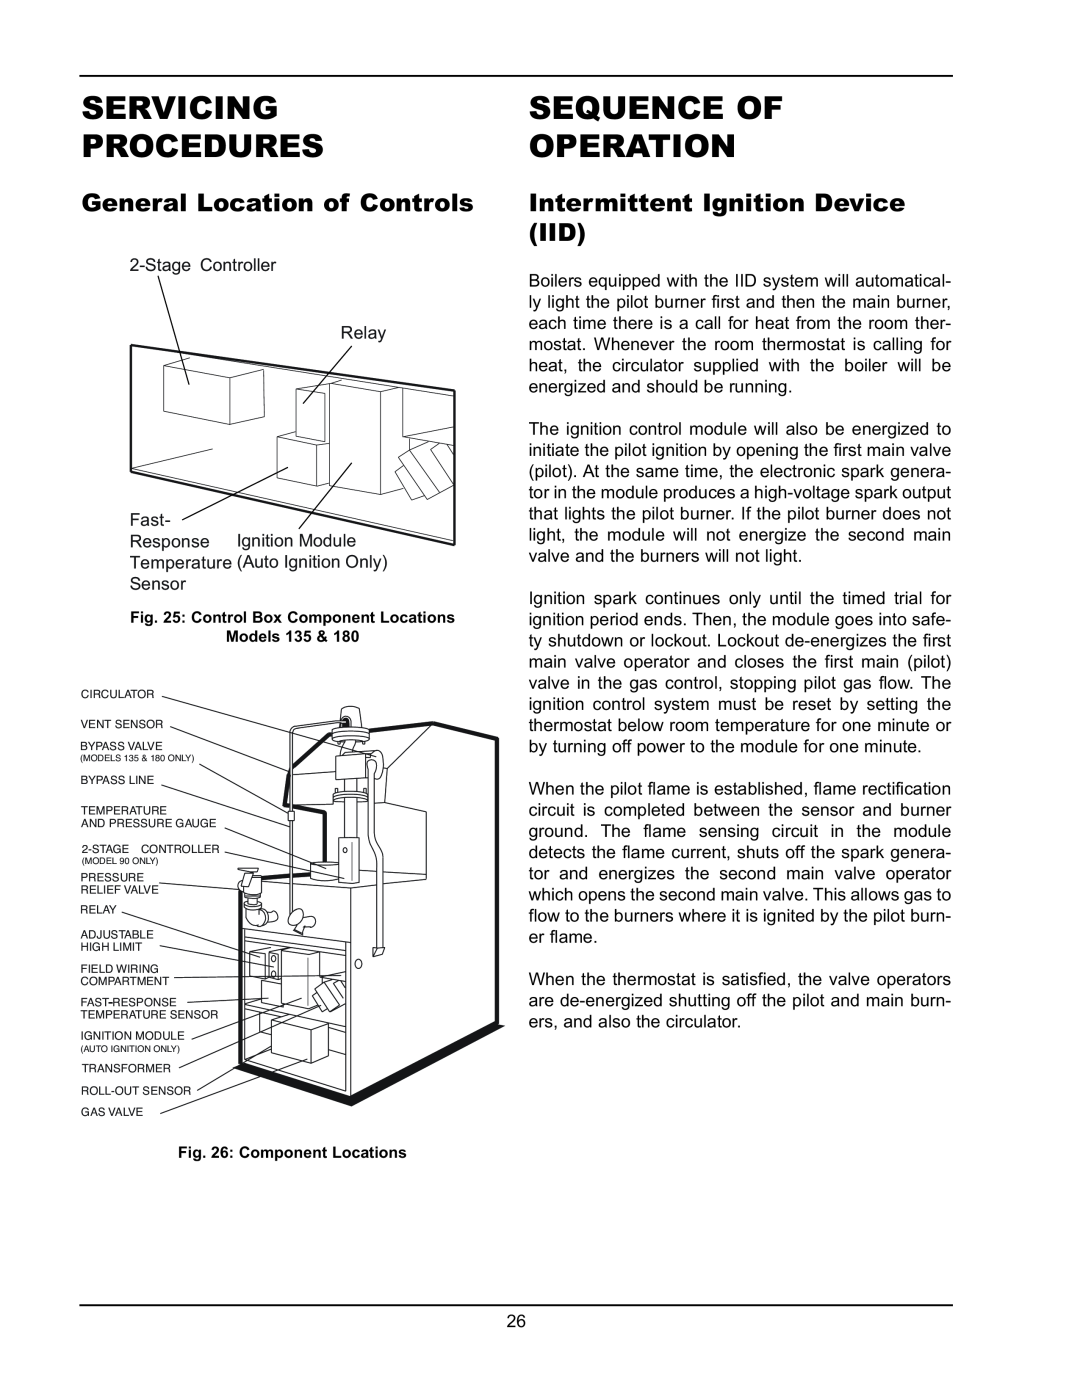 Raypak 0042B Servicing Procedures, Sequence Of Operation, General Location of Controls, Intermittent Ignition Device IID 